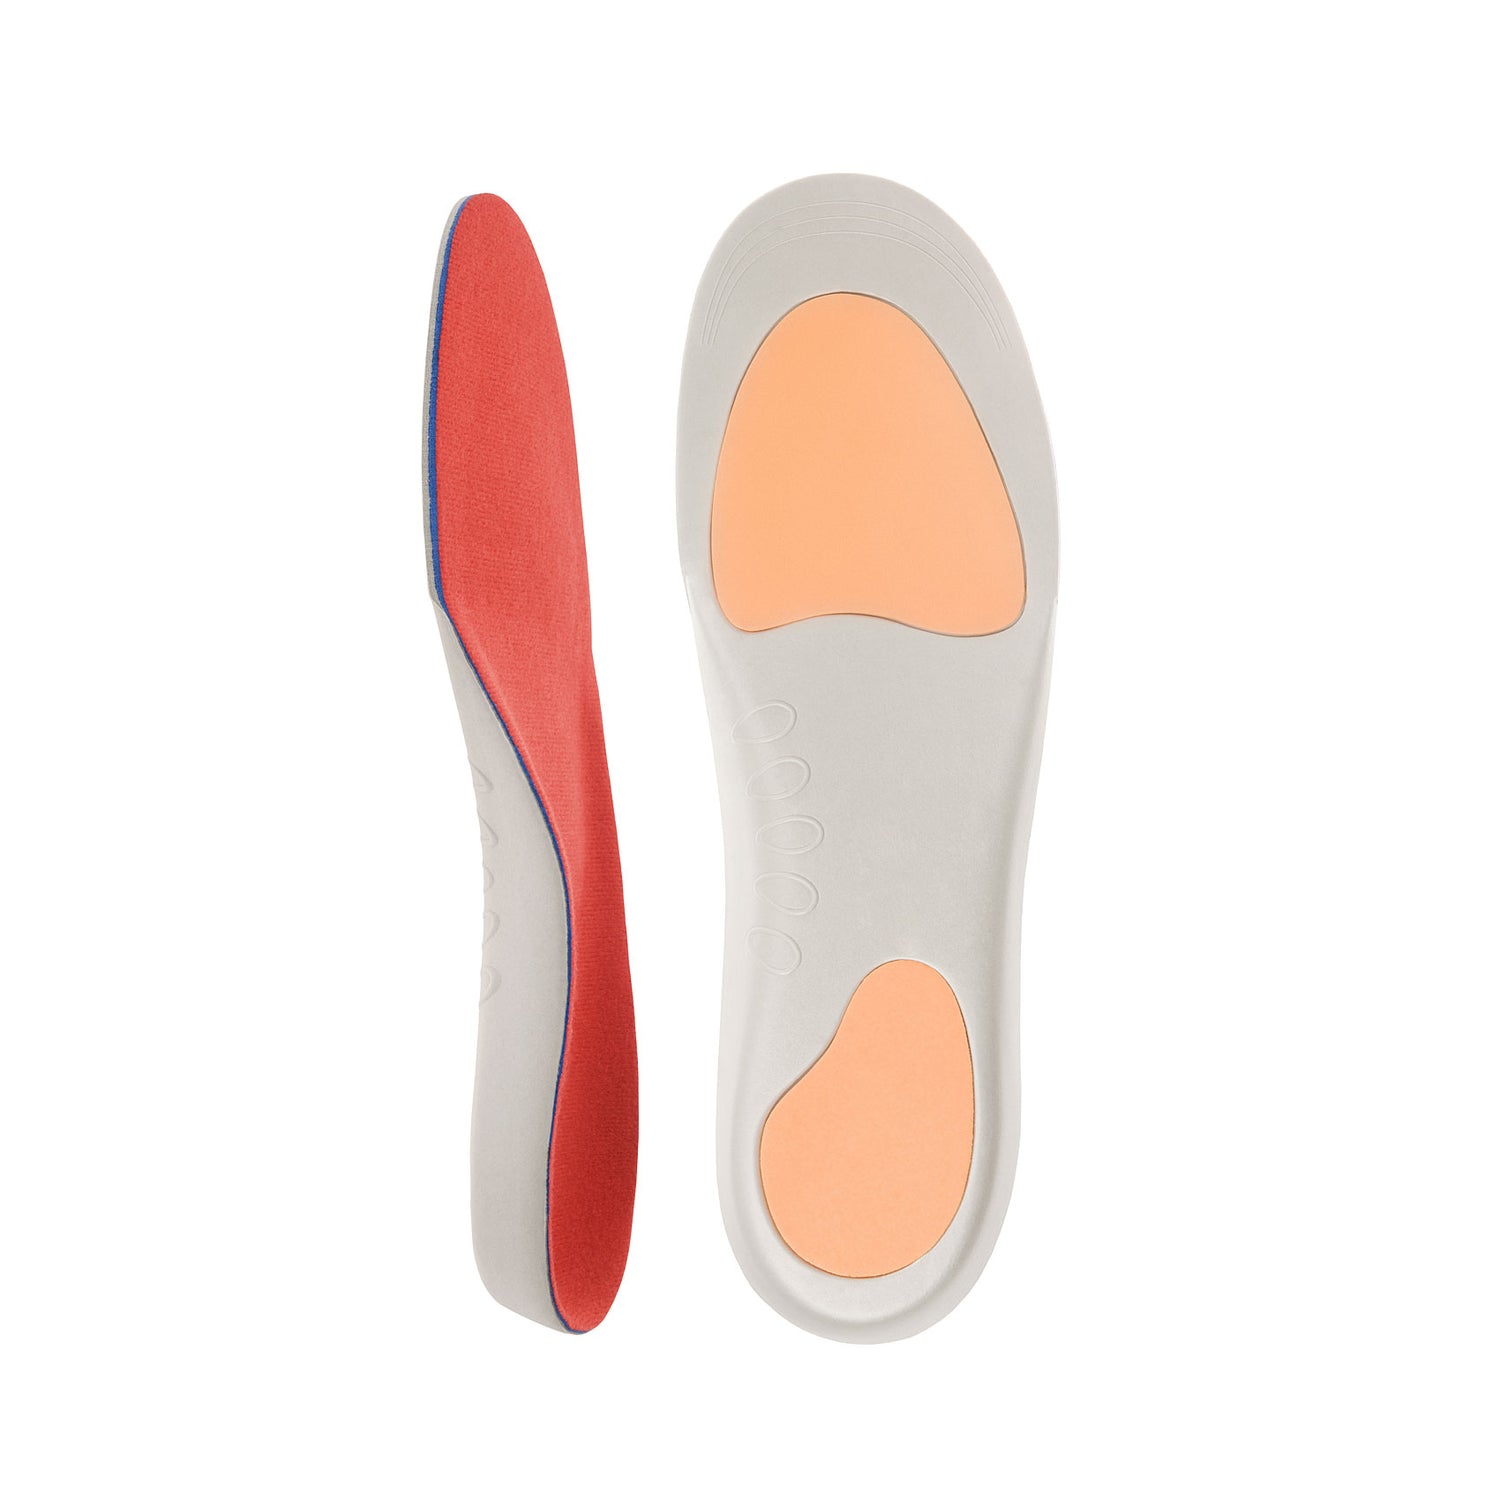 DJMed Orthotic - Shoe Insoles - Womens 9-10.5